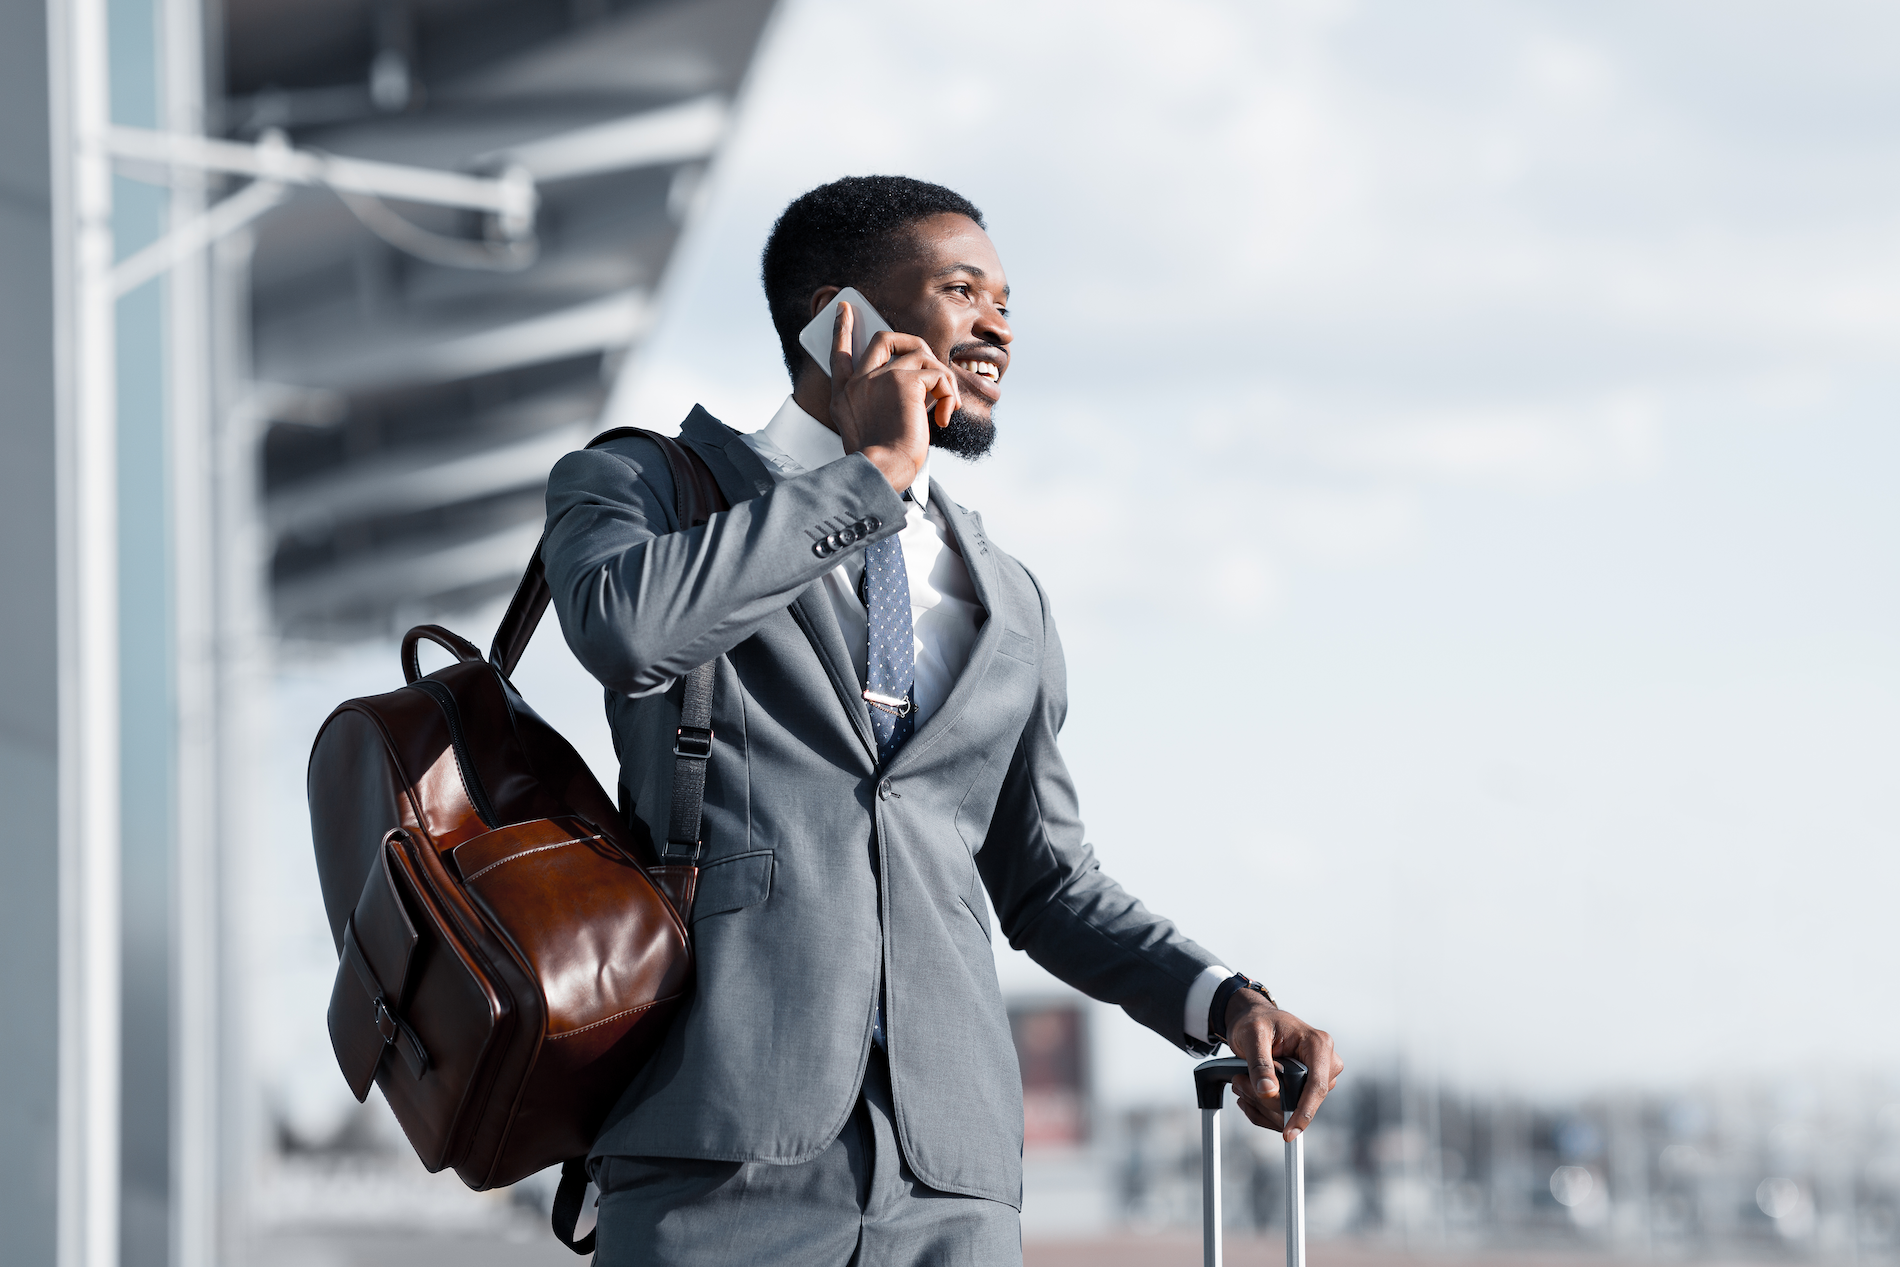 A Black man wearing a tailored suit talks on a phone at an airport while waiting for a taxi. He has a leather backpack slung over one shoulder and the handle for a rolling suitcase in the other.